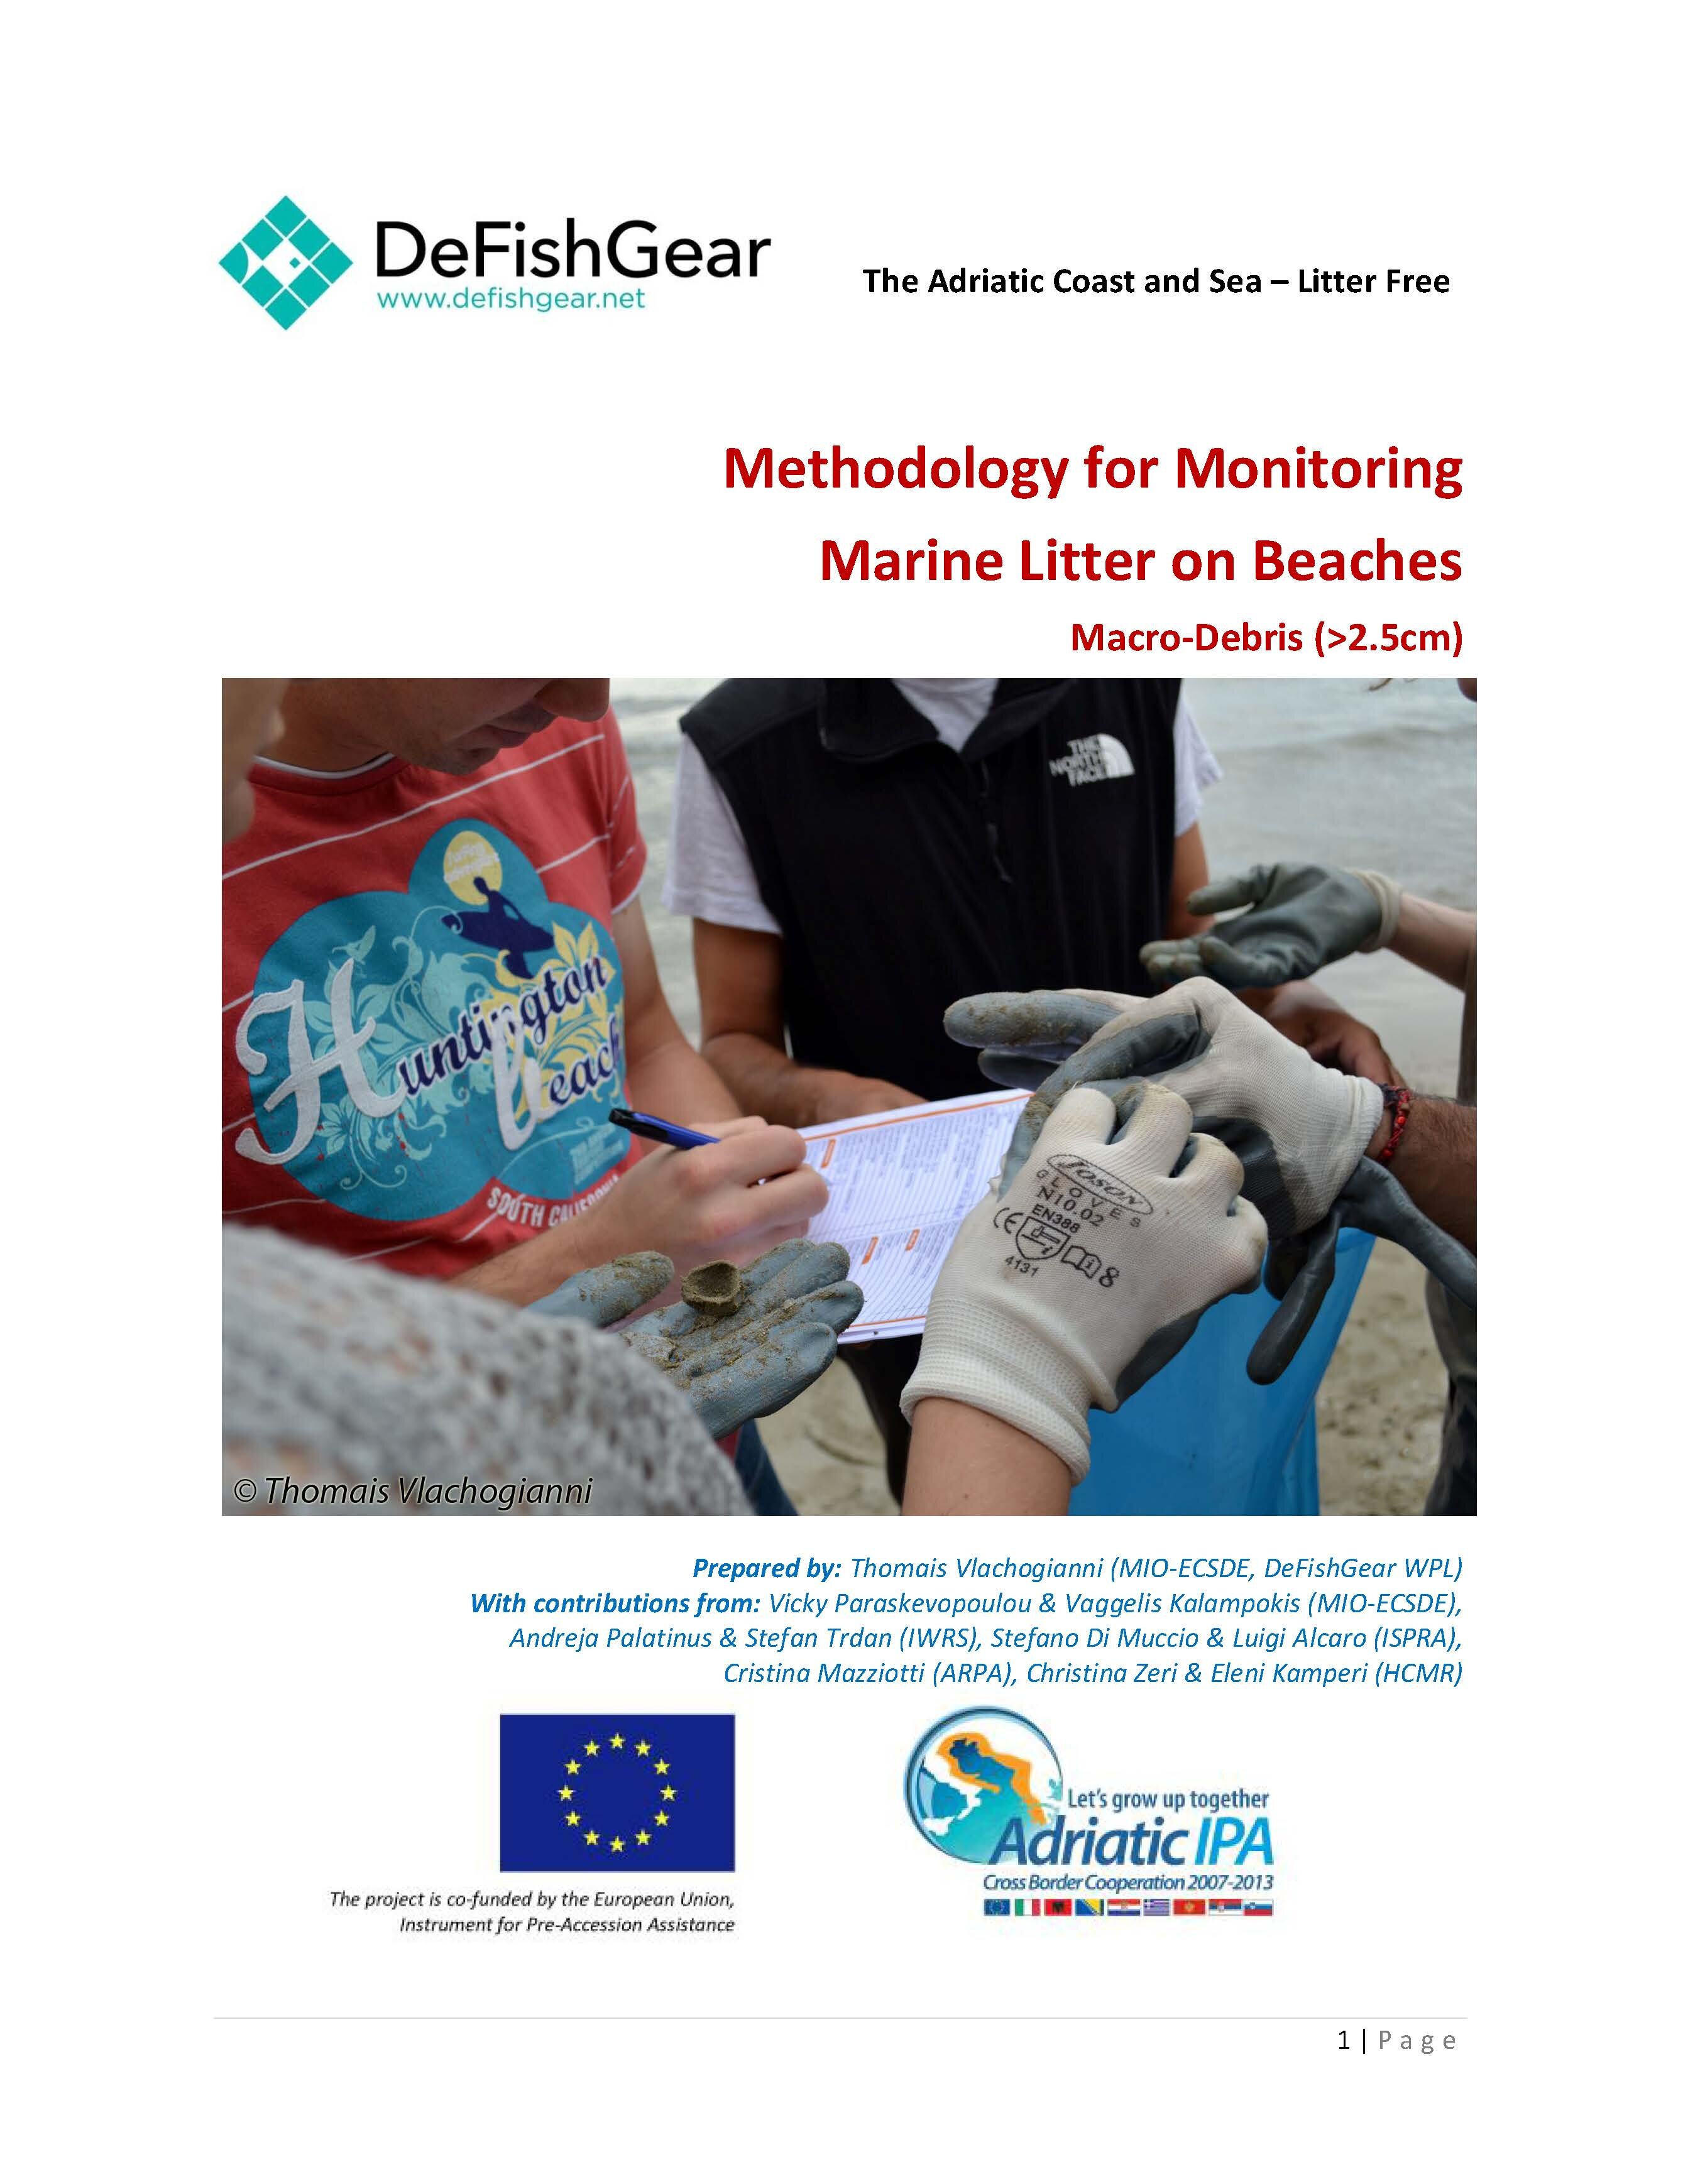 Beach litter monitoring methodology complete Page 01